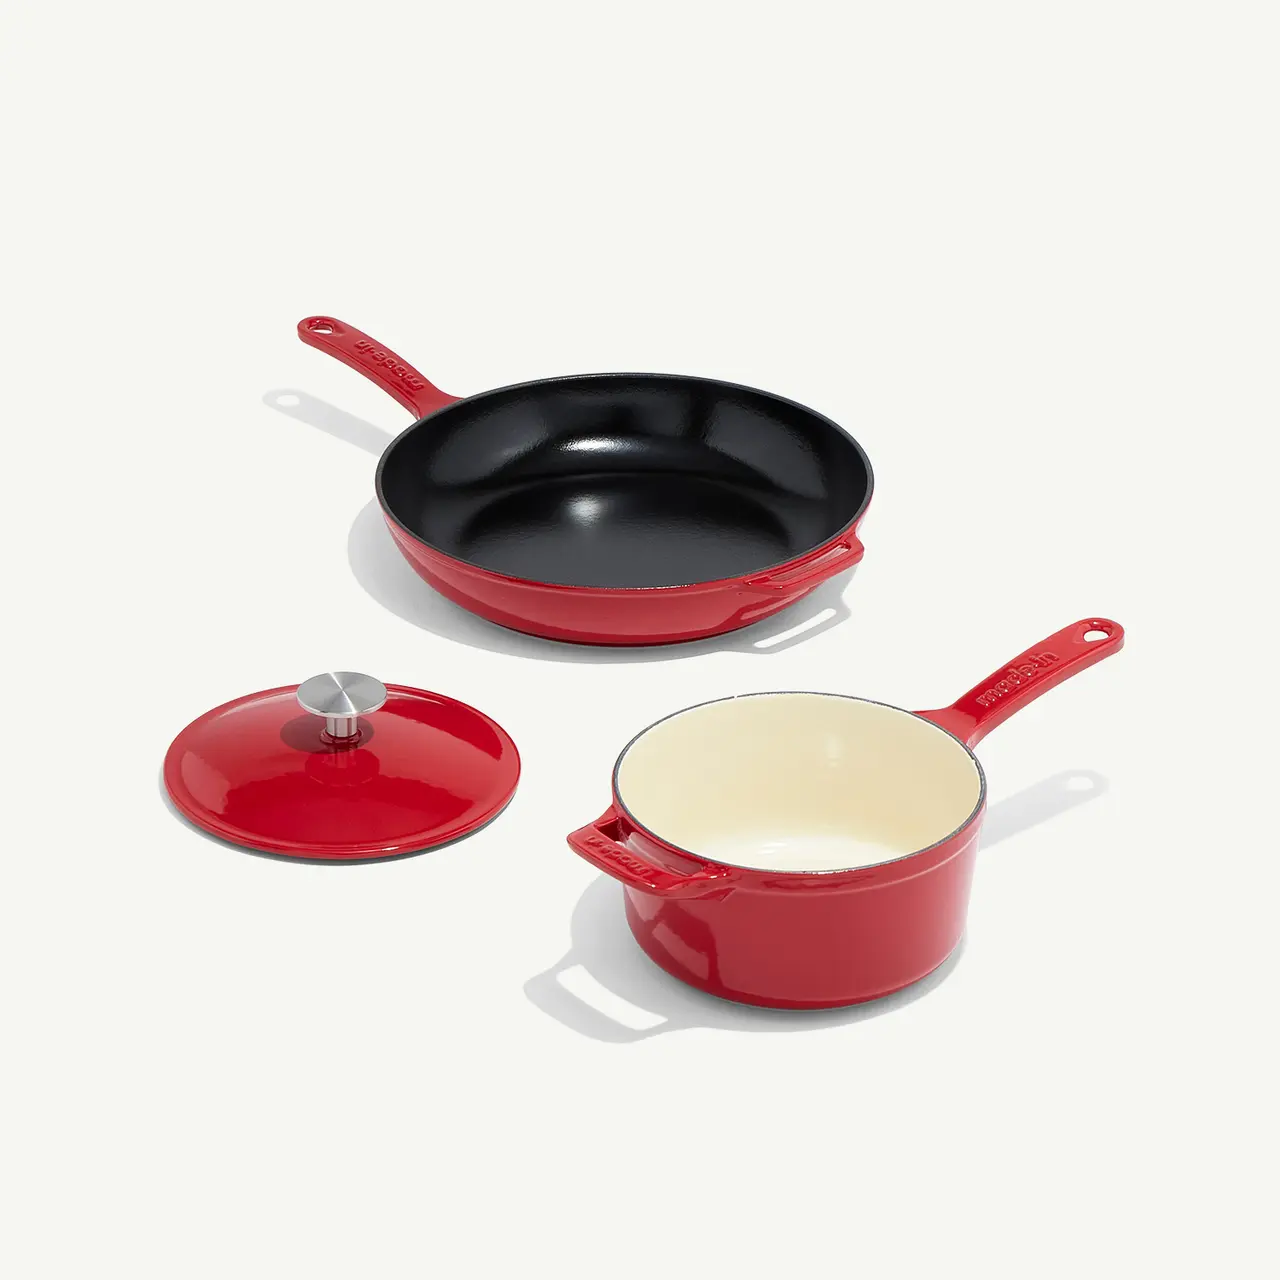 A set of red cookware consisting of a frying pan, saucepan with a lid, and a pot on a white background.